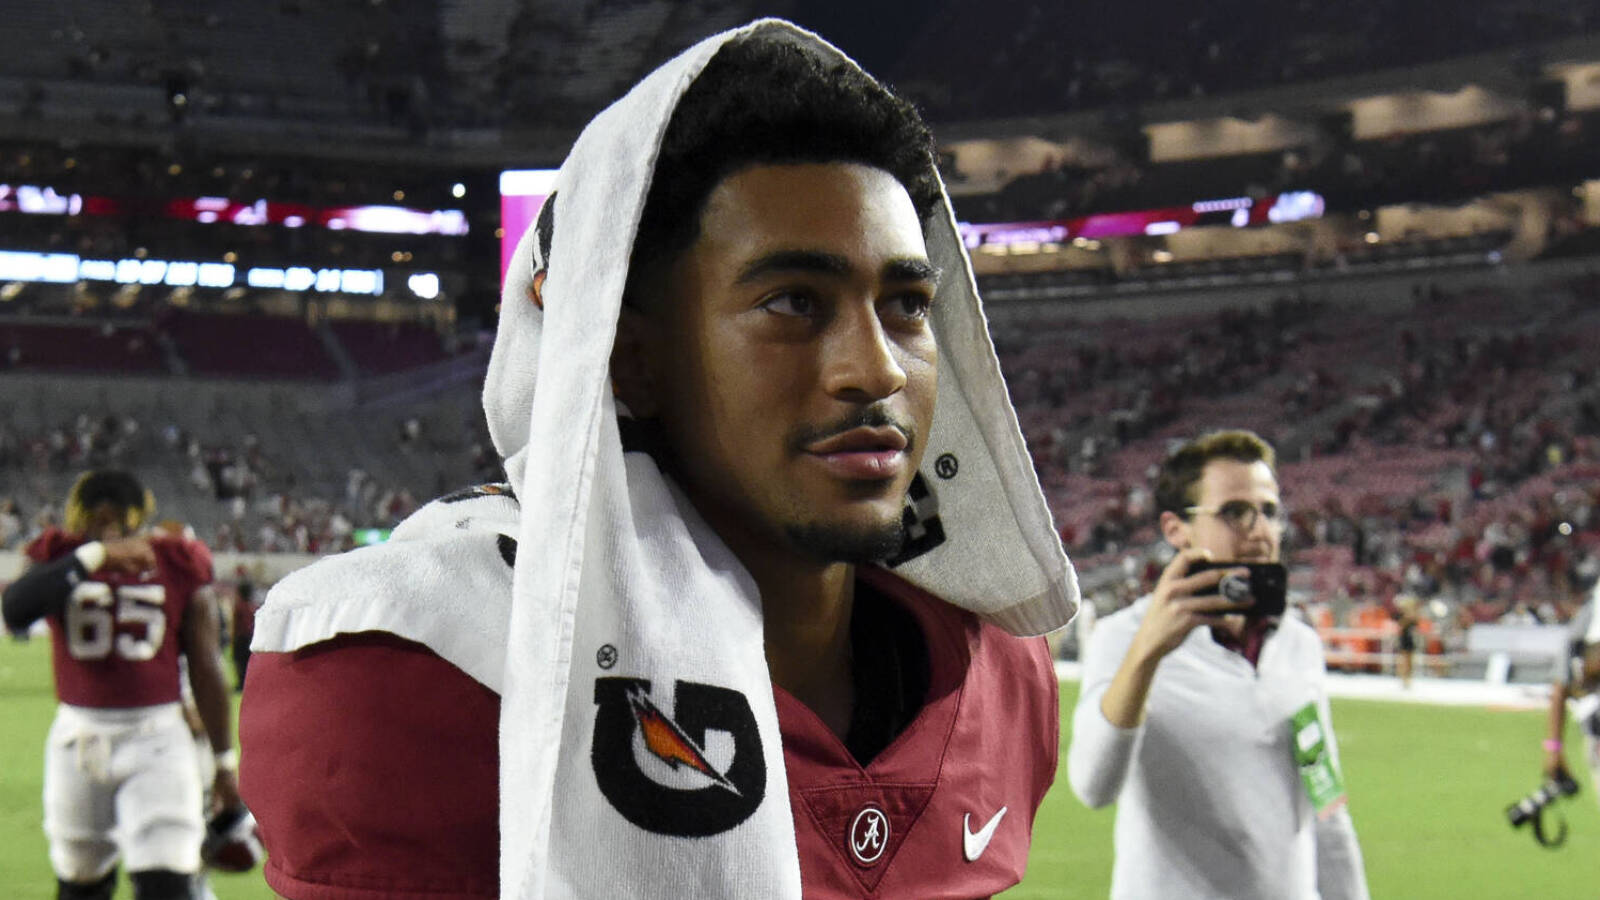 Nick Saban won't commit to firm timetable for Alabama QB Bryce Young's return